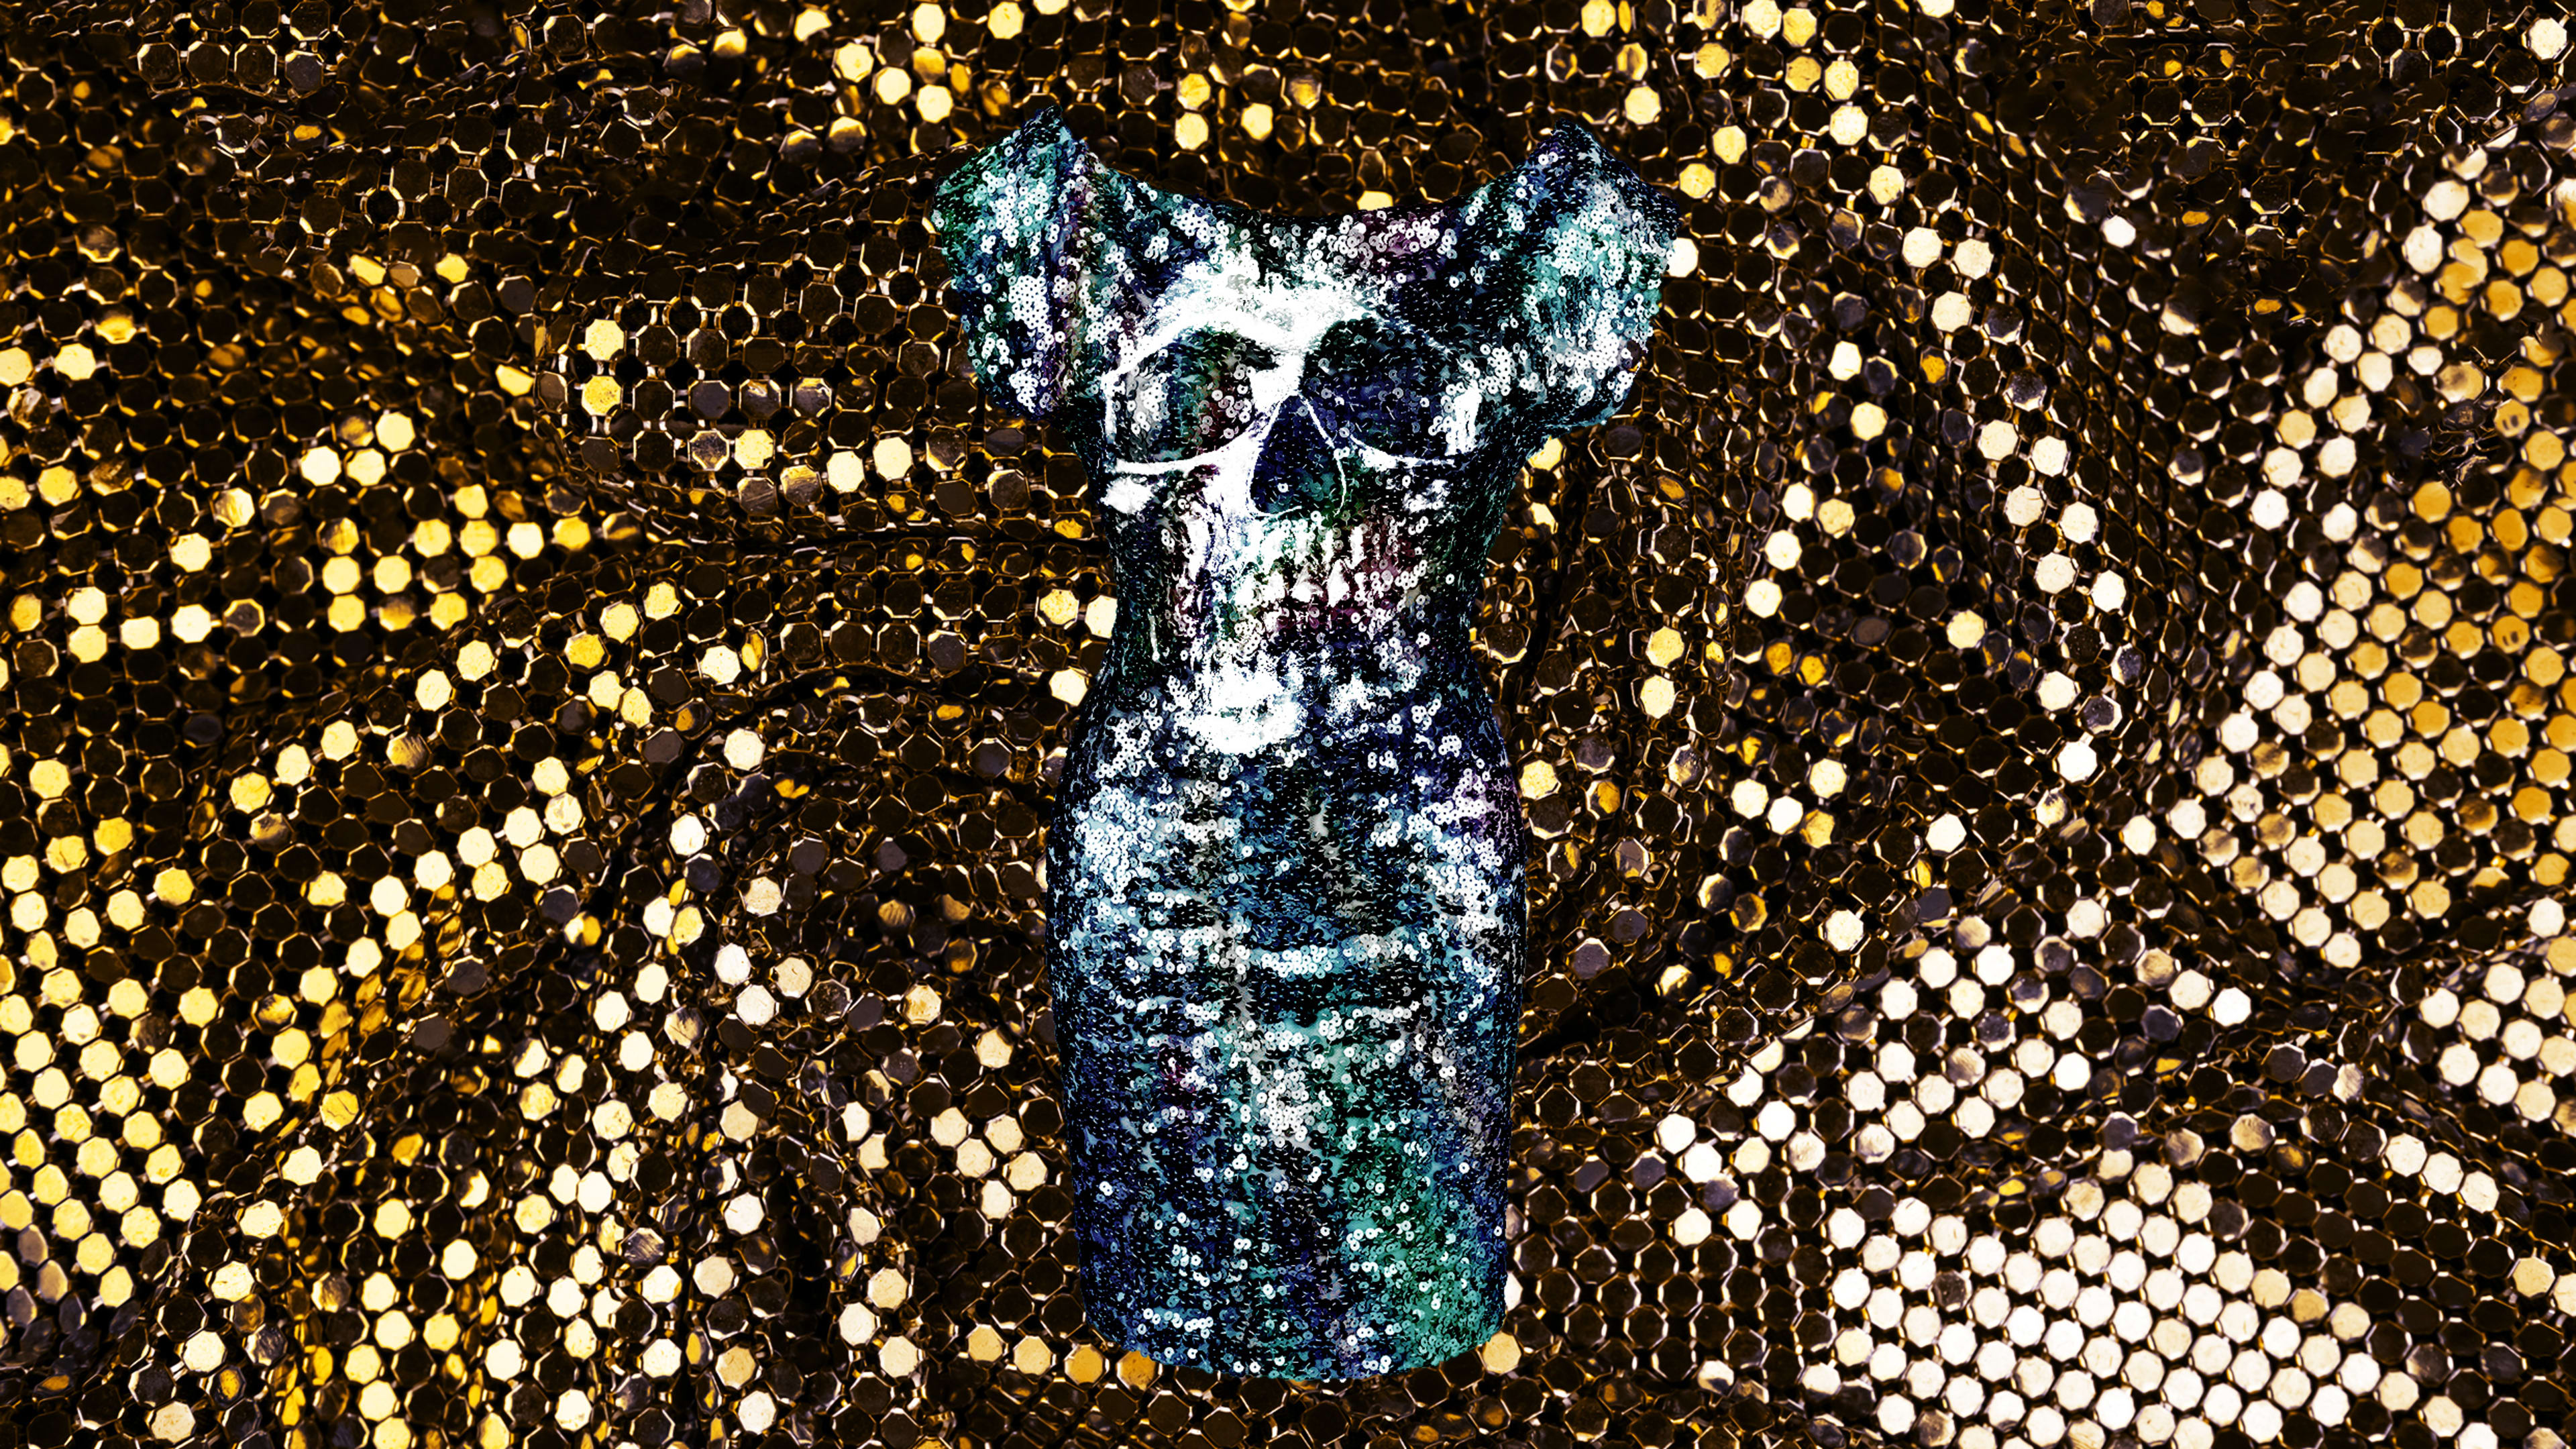 Sequins are terrible for the environment. A greener (and sparklier) alternative is here